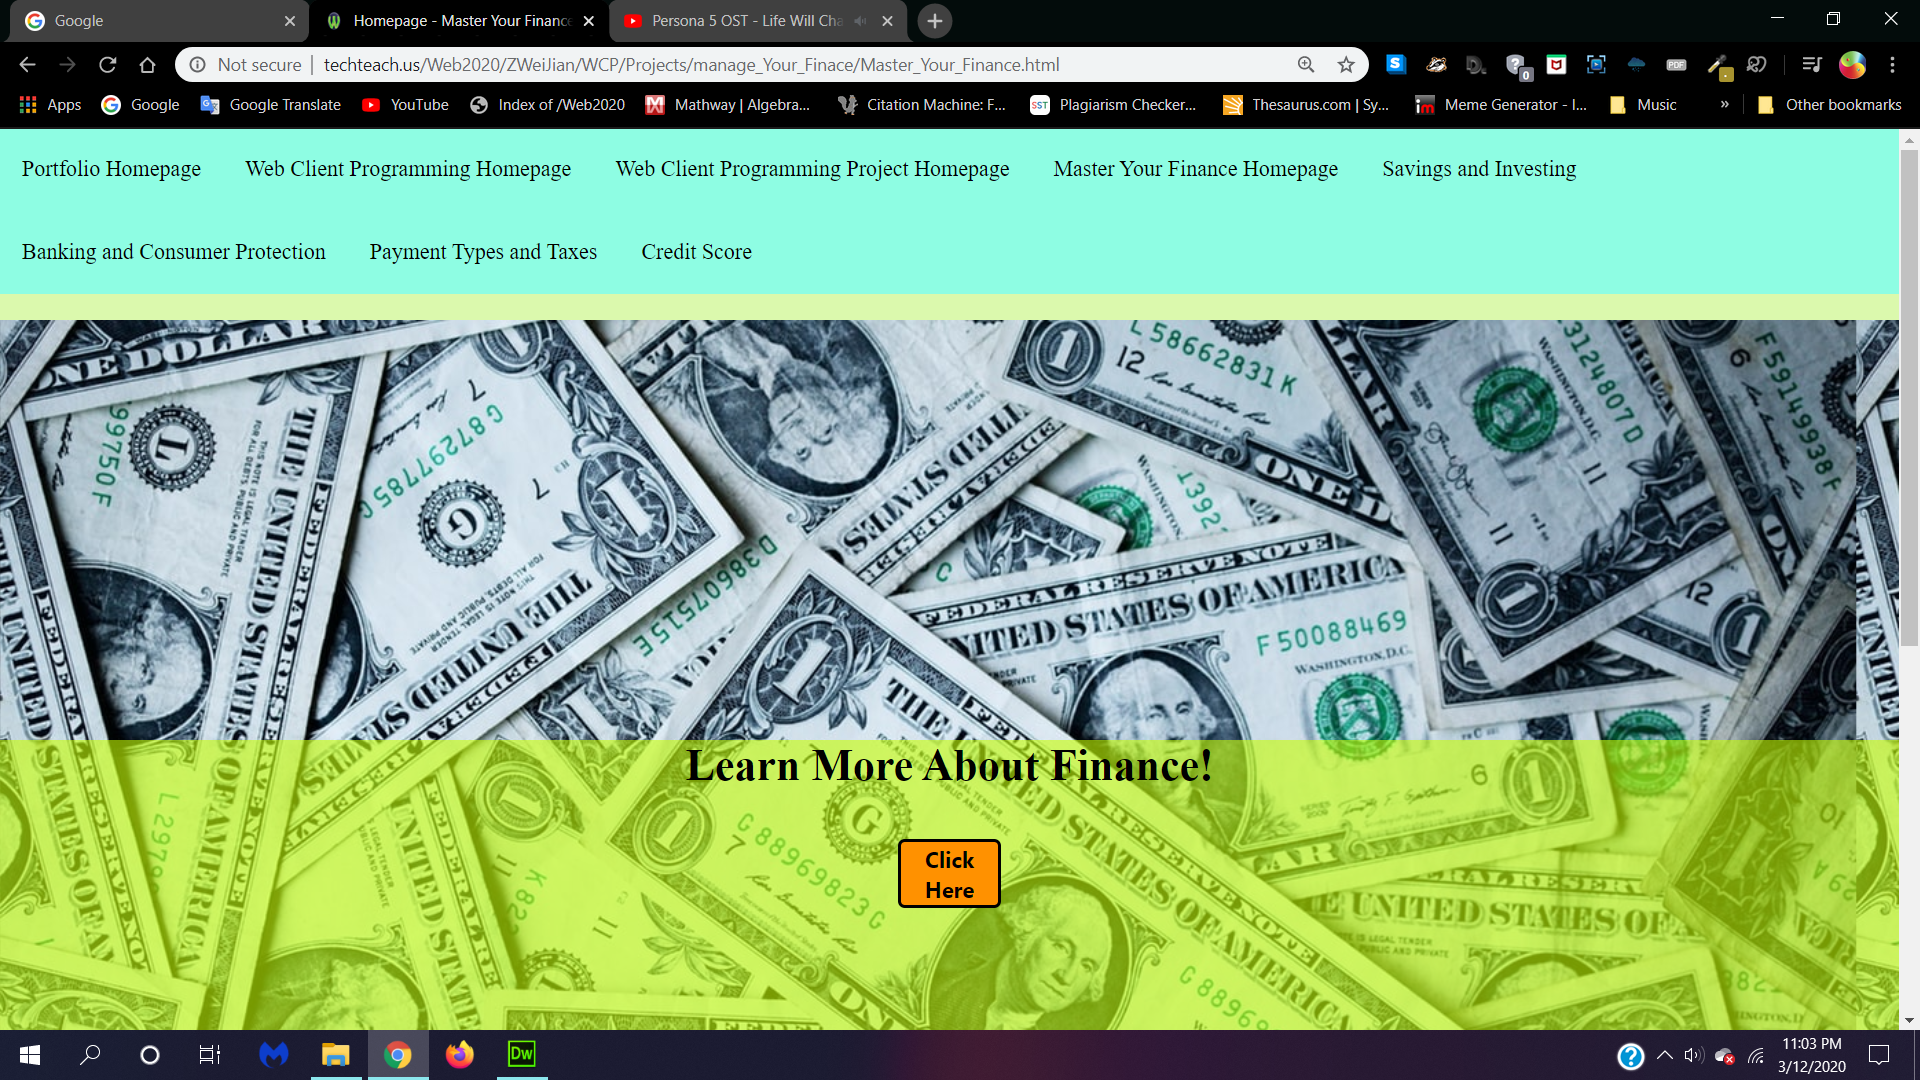 An image of the Master Your Finance Homepage which discusses and educates the user about finance